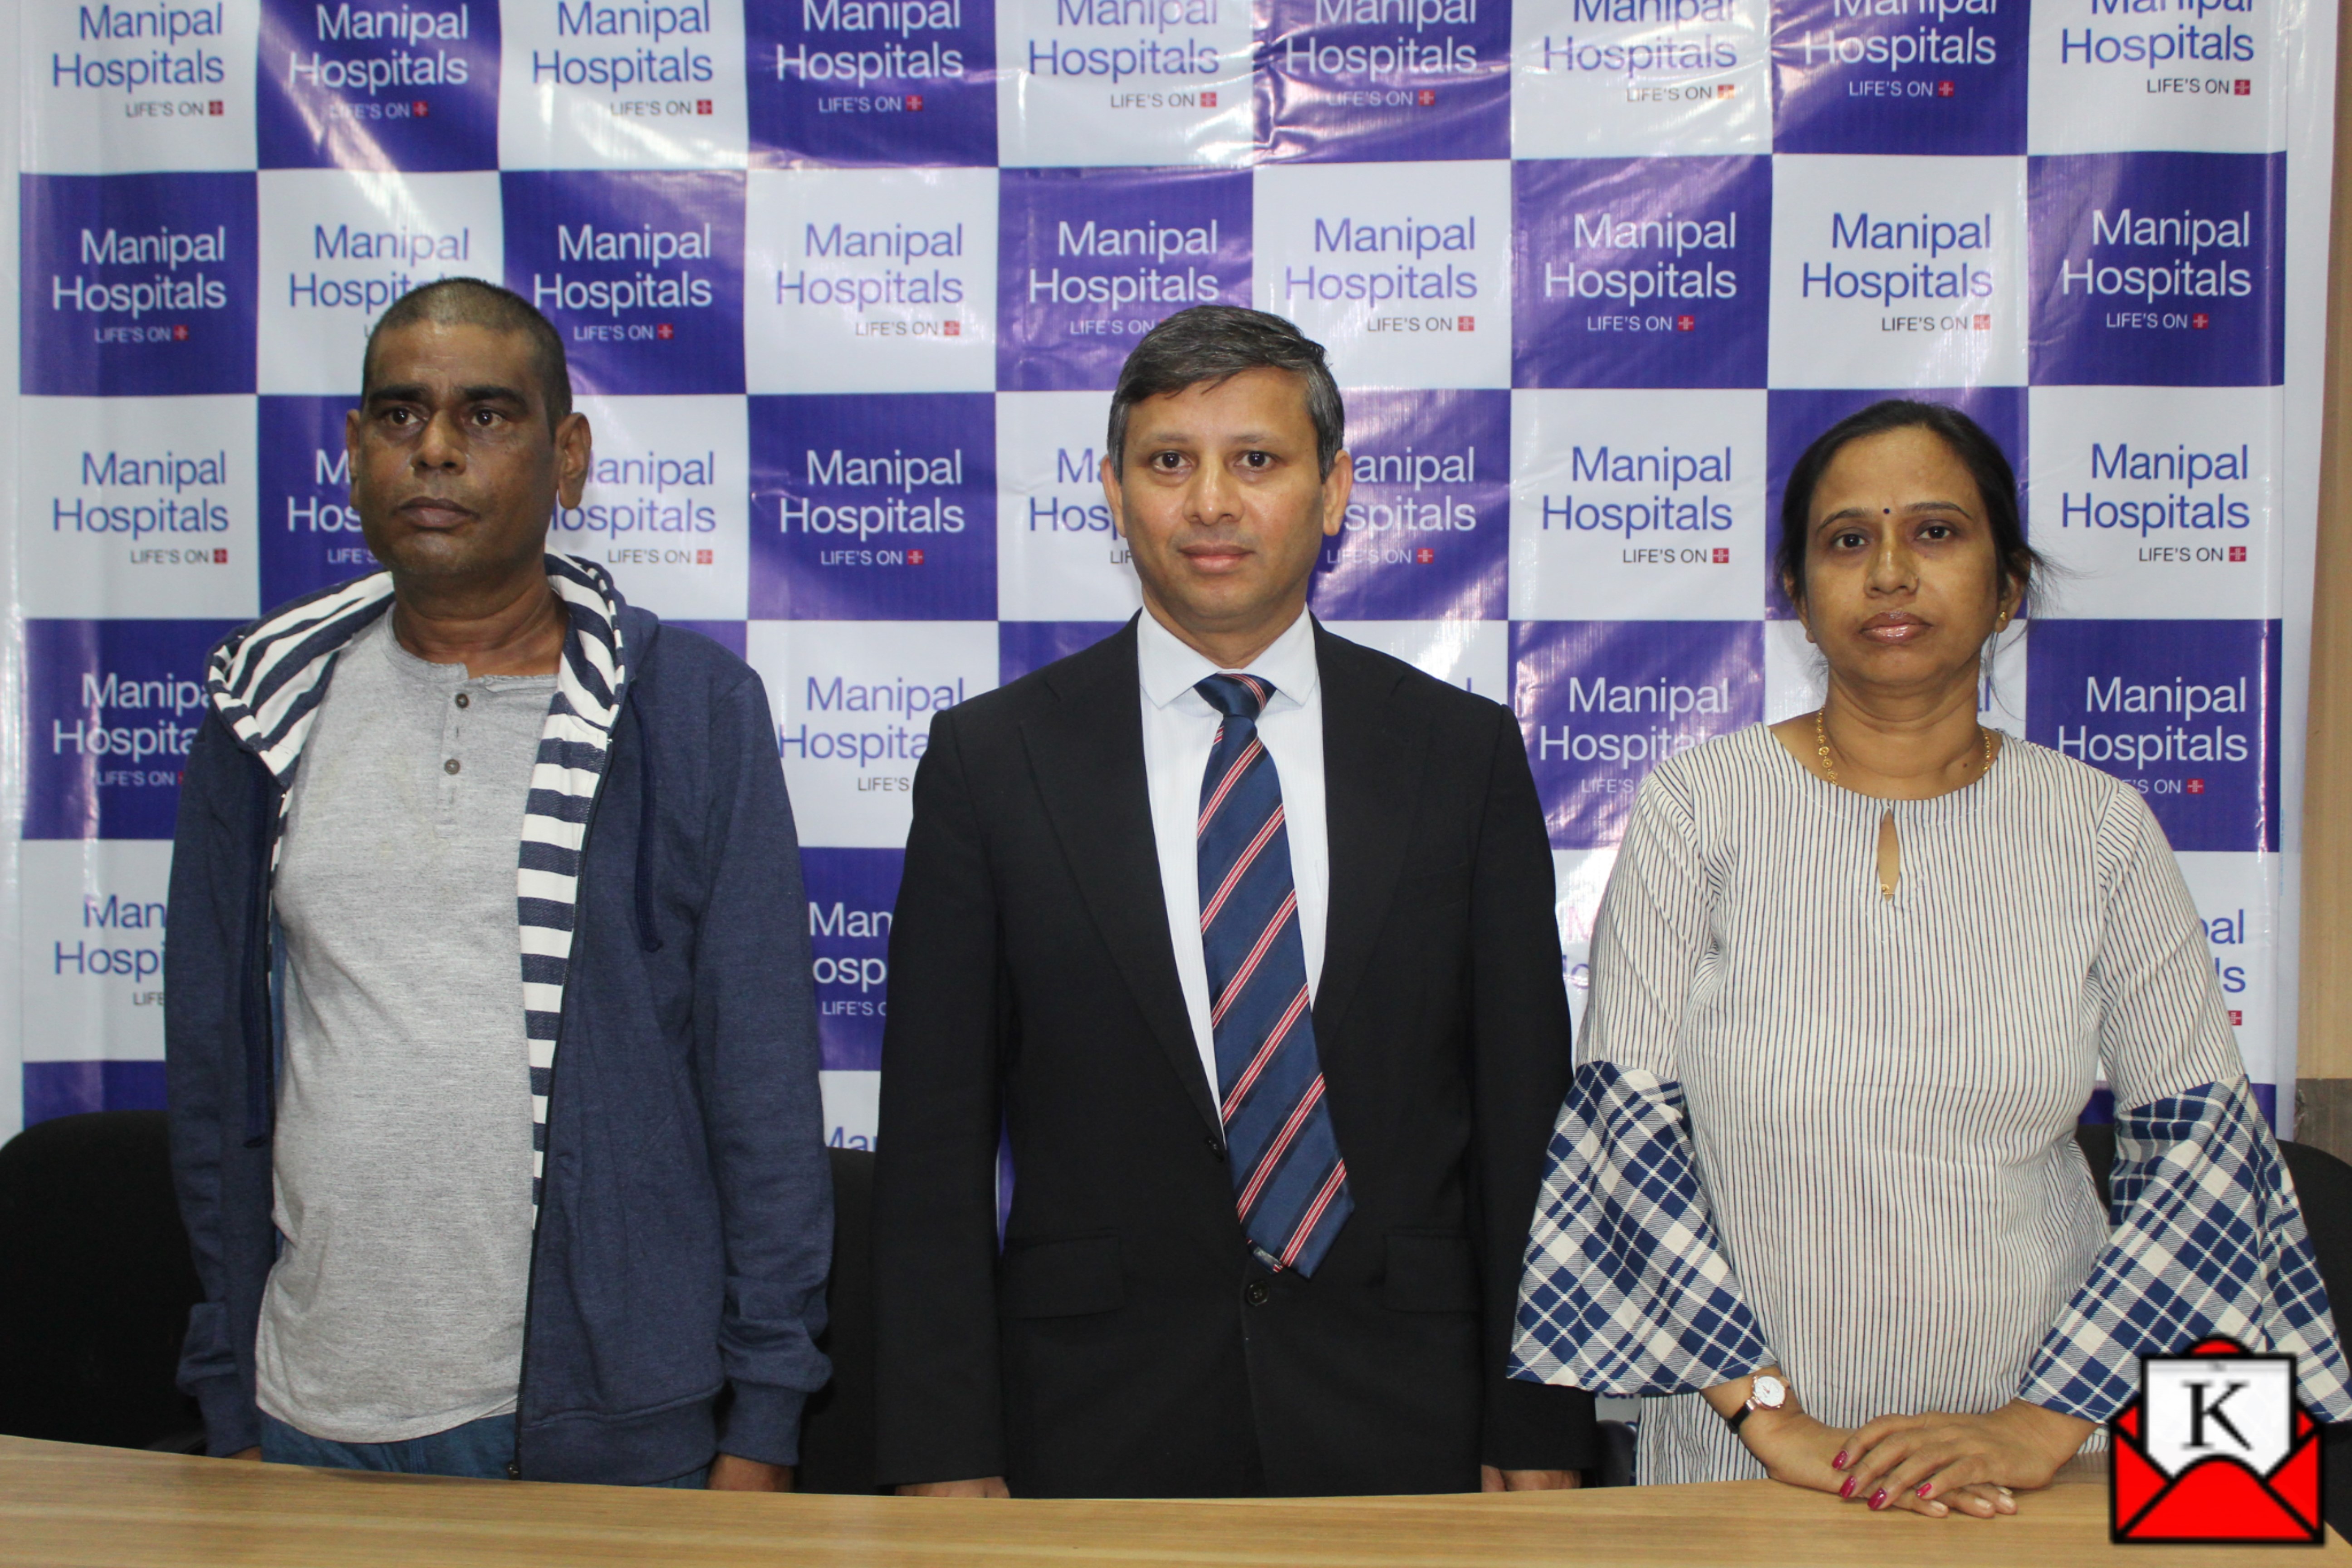 Life Saving Liver Transplant Performed Successfully on Two Bengali Patients at Manipal Hospitals